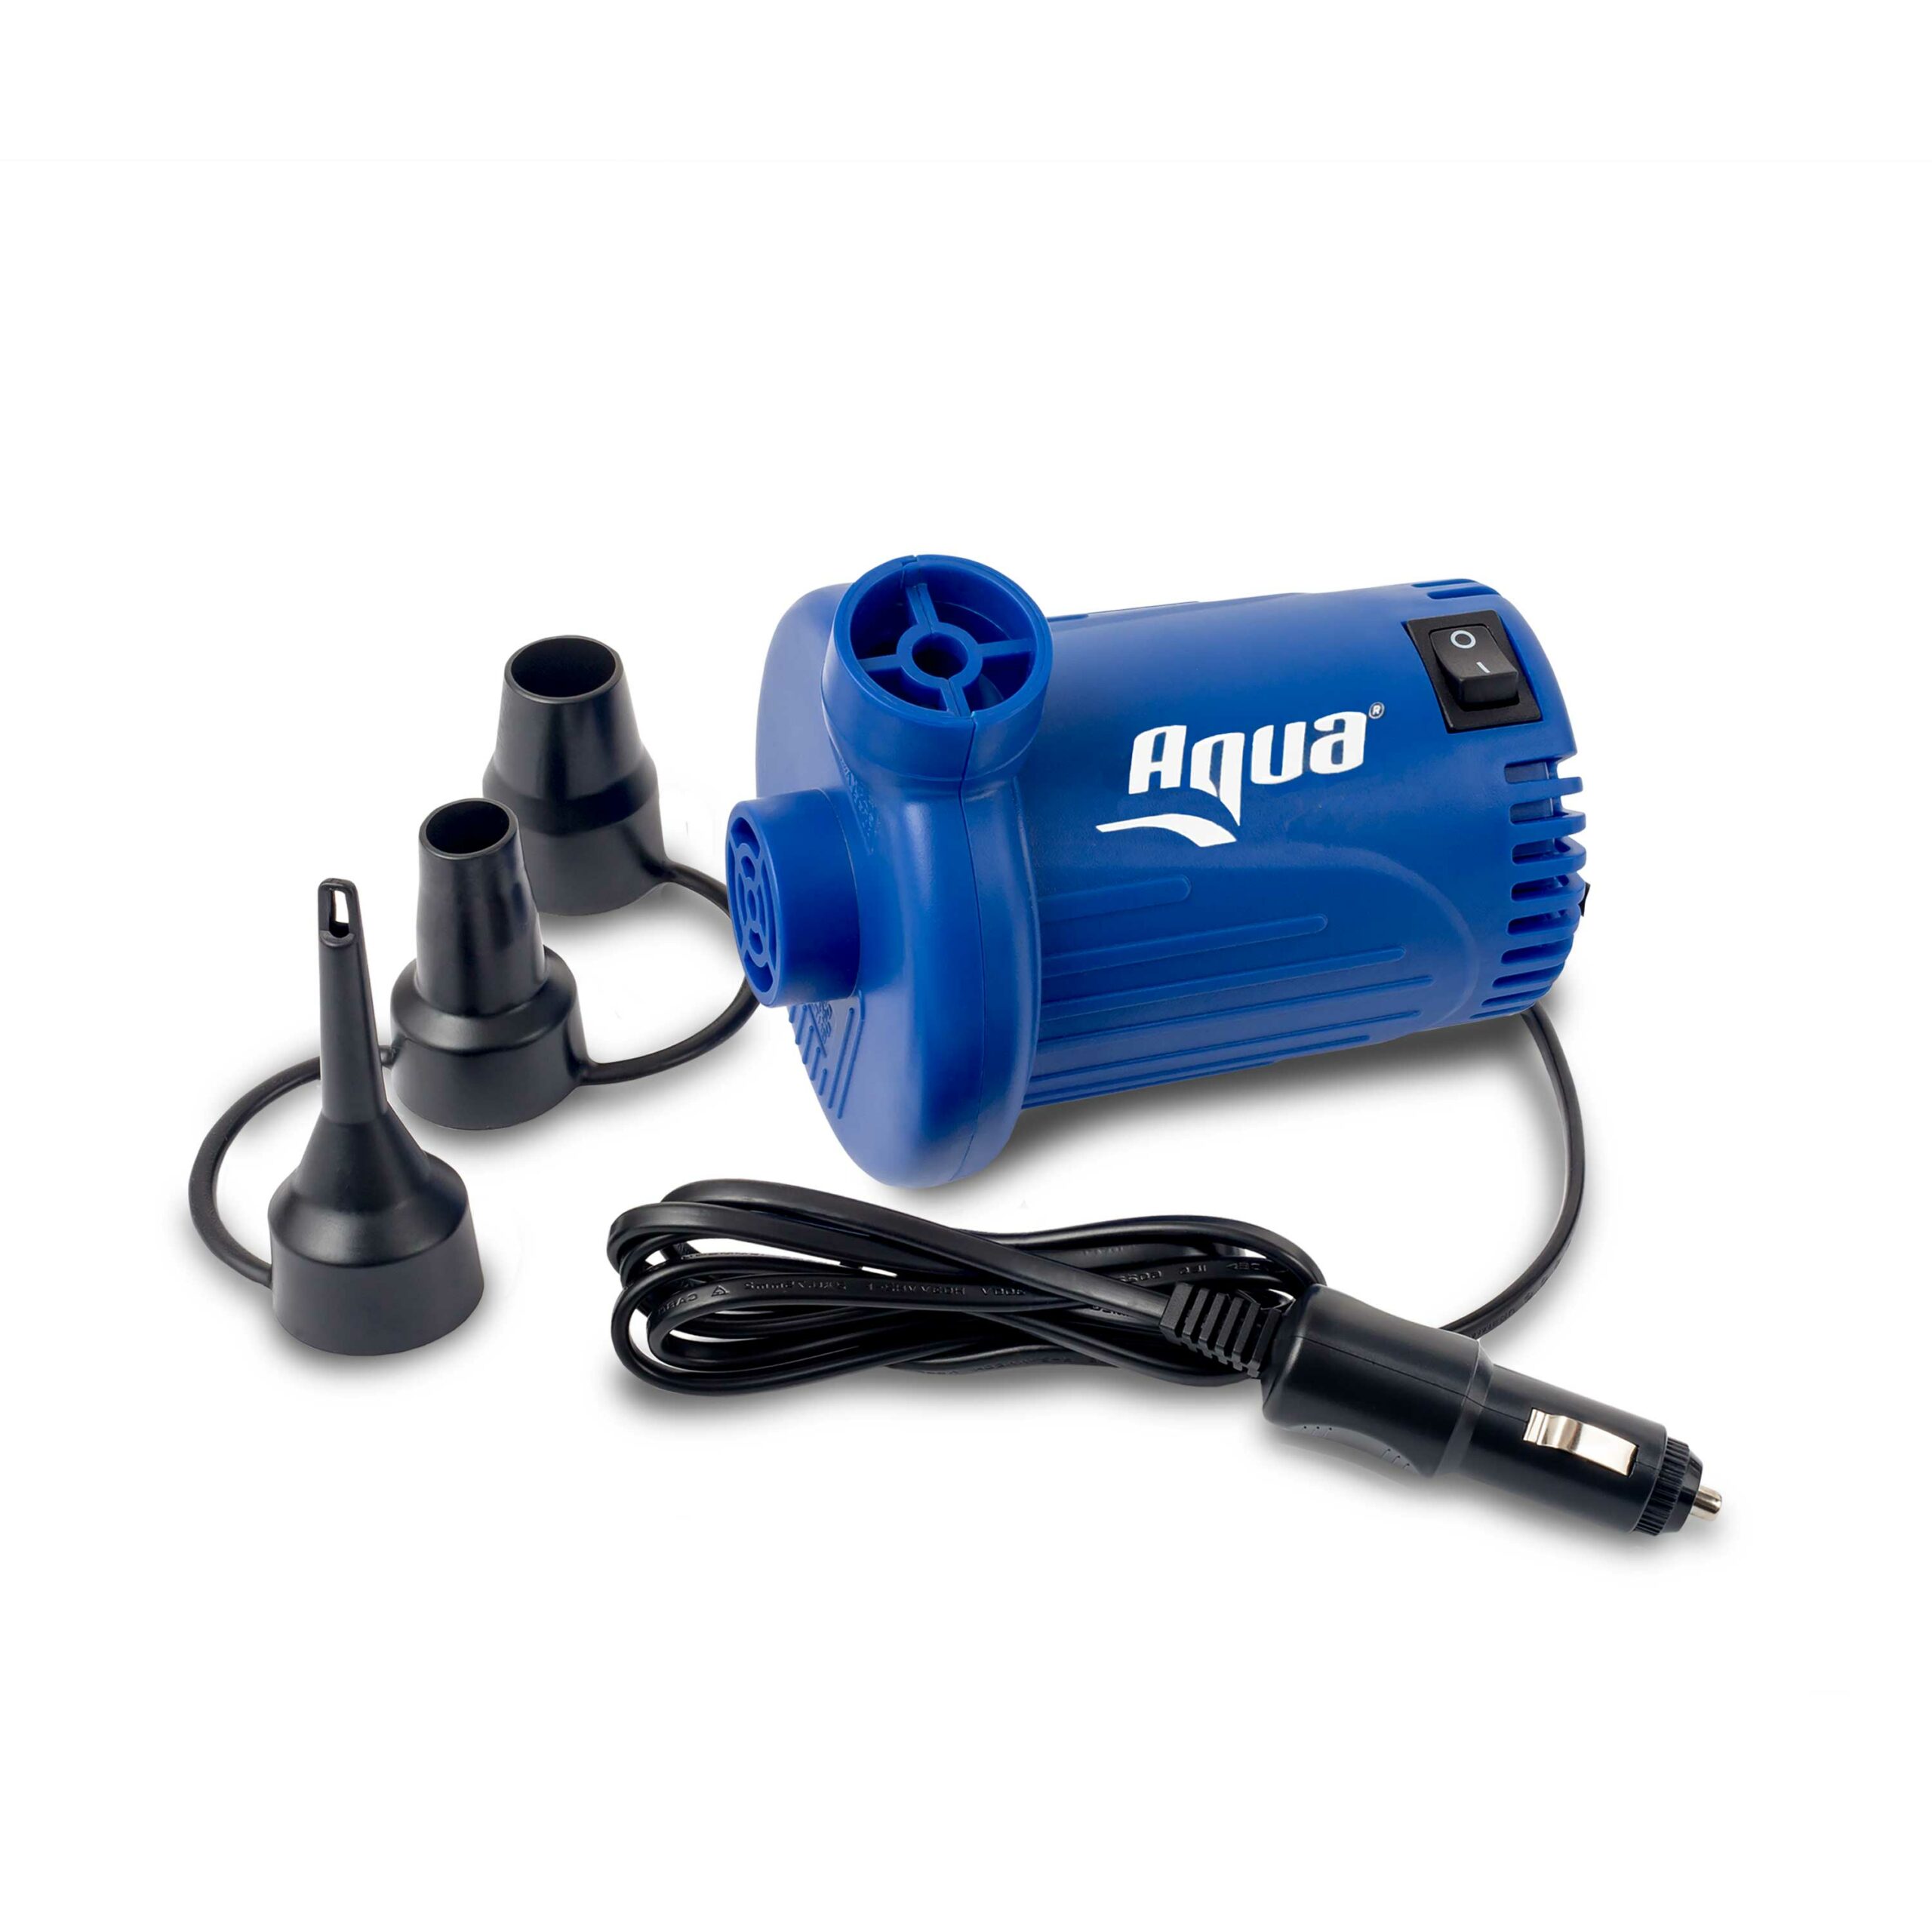 Aqua Heavy Duty Dual Action Inflating Hand Pump For Air Mattresses, Pool  Floats, And Inflatables With 4 Nozzle Adapters Attachments, Black : Target